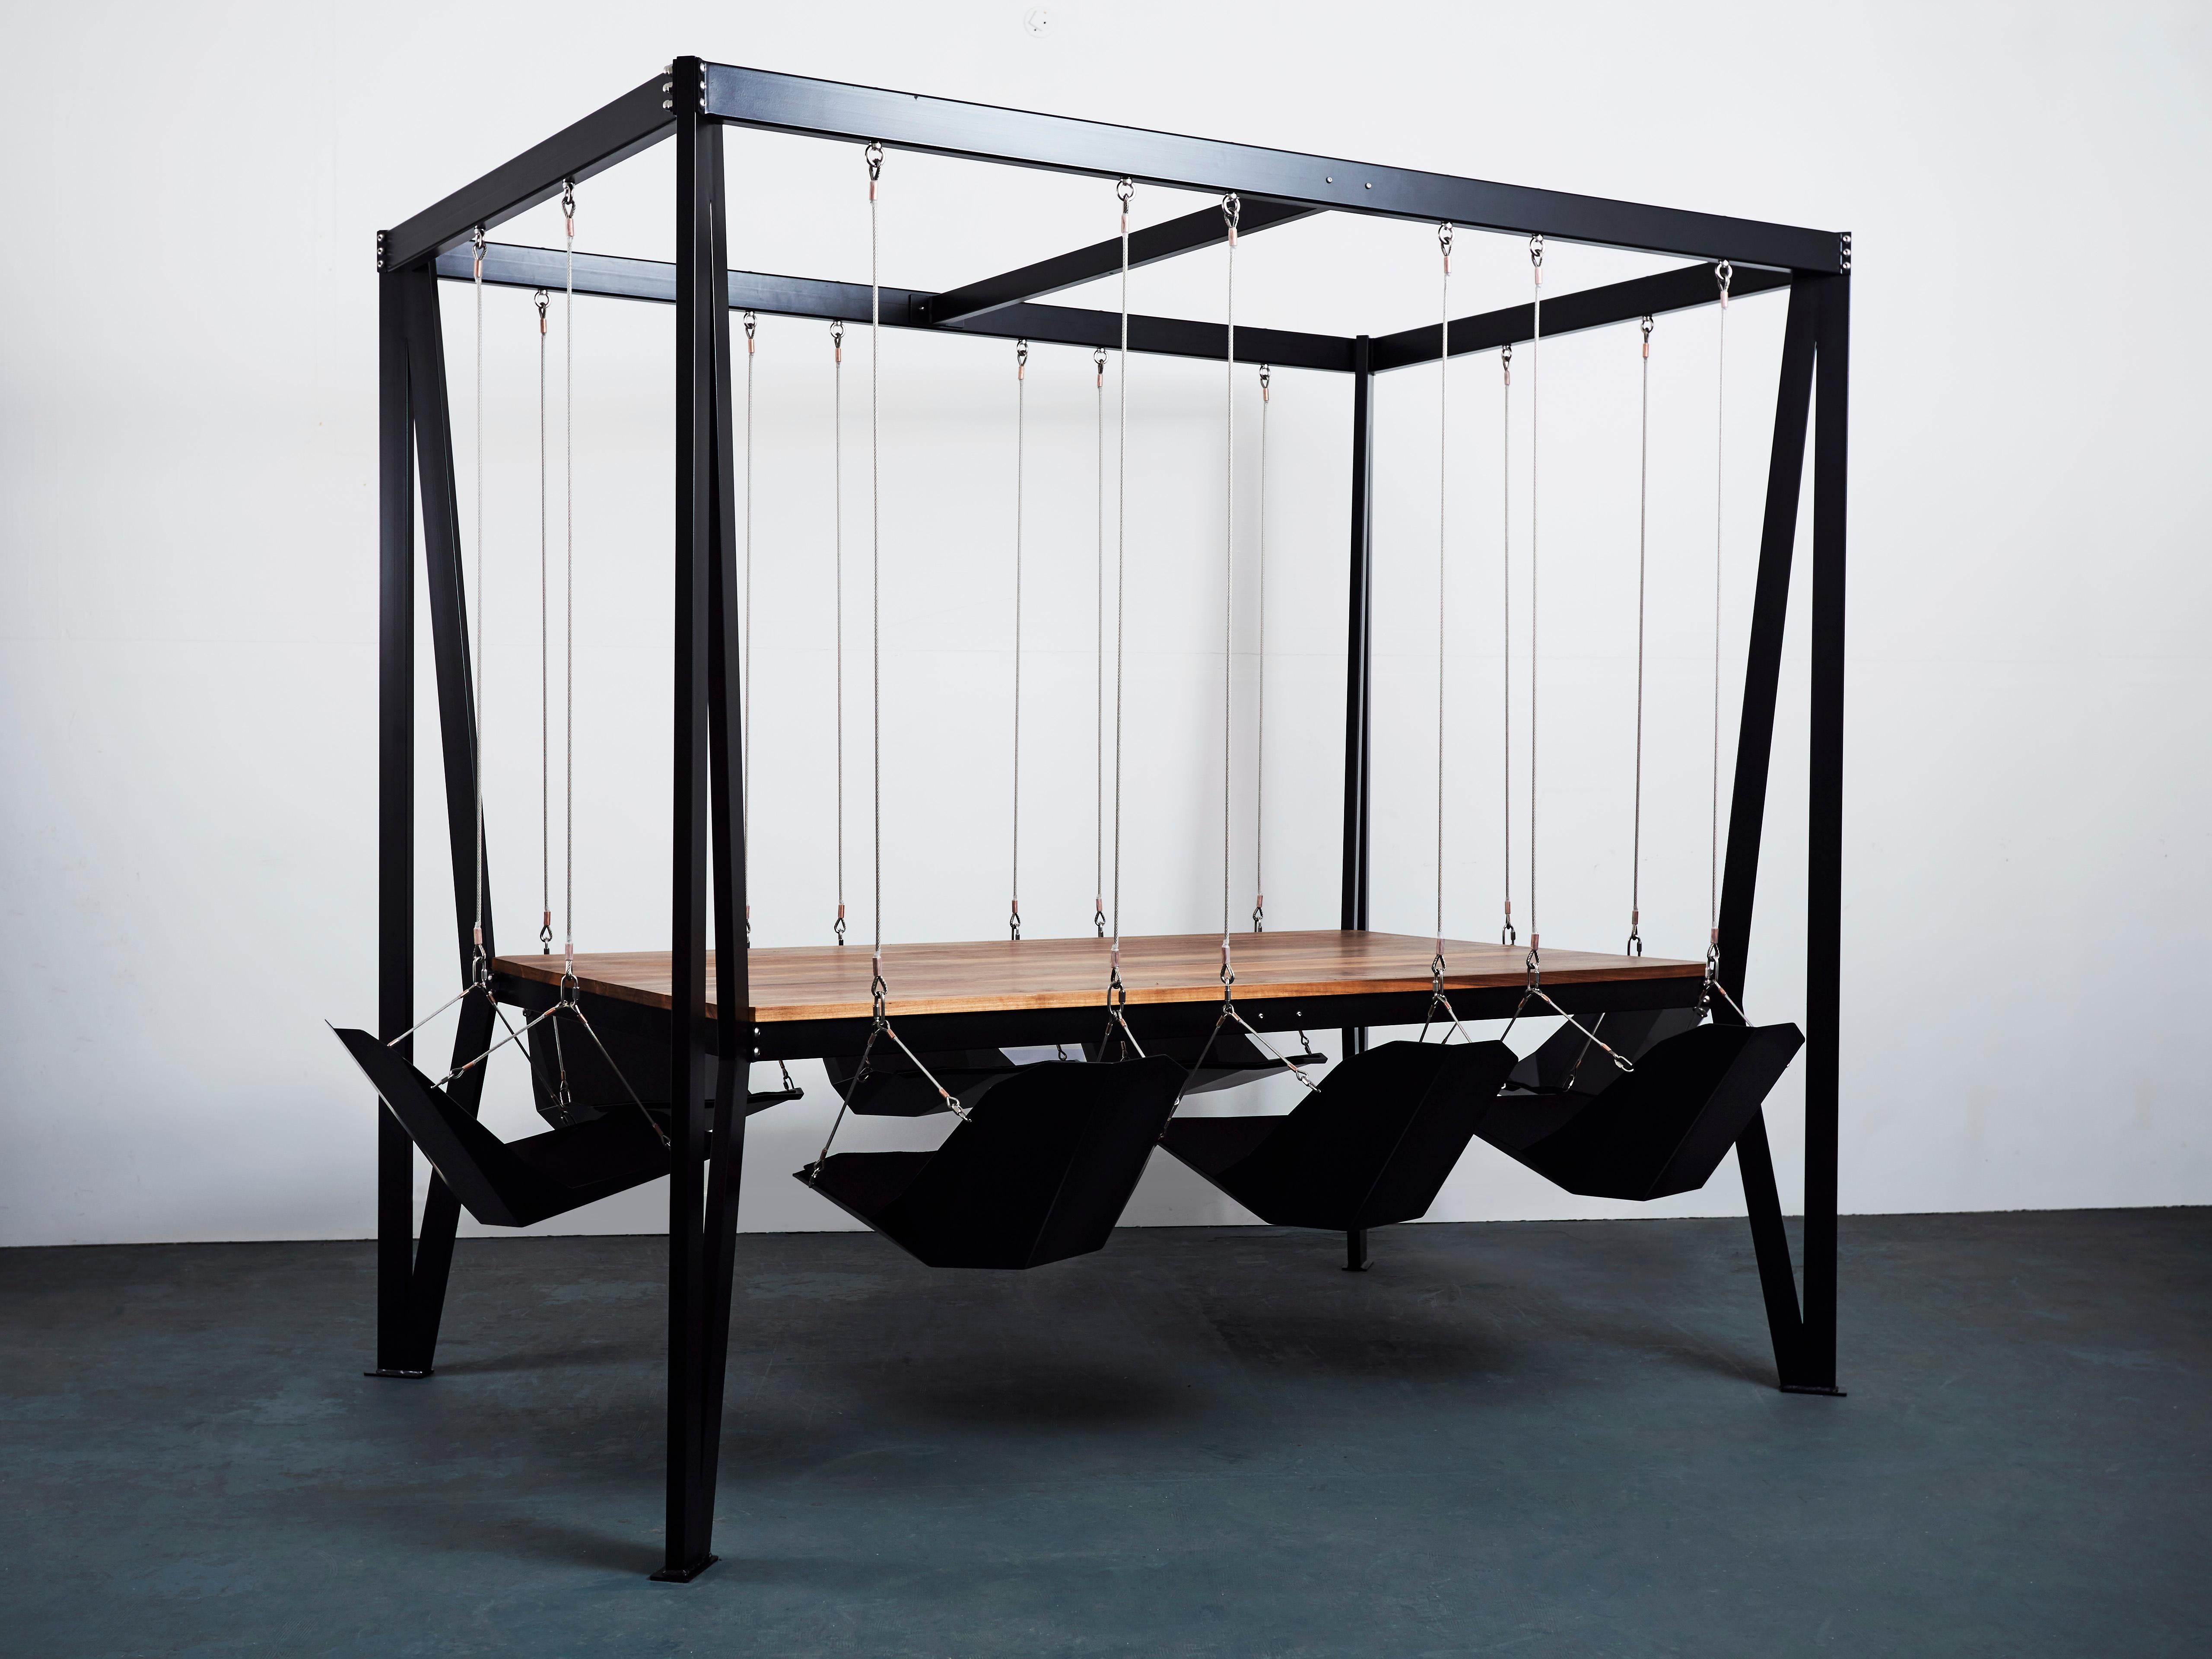 Bring the playground into the boardroom, dining room, or living space with the Original Swing Table by Duffy London. The Swing table seats up to 8 people and works equally well as a dining table or boardroom table.

Snap staff or dinner guests out